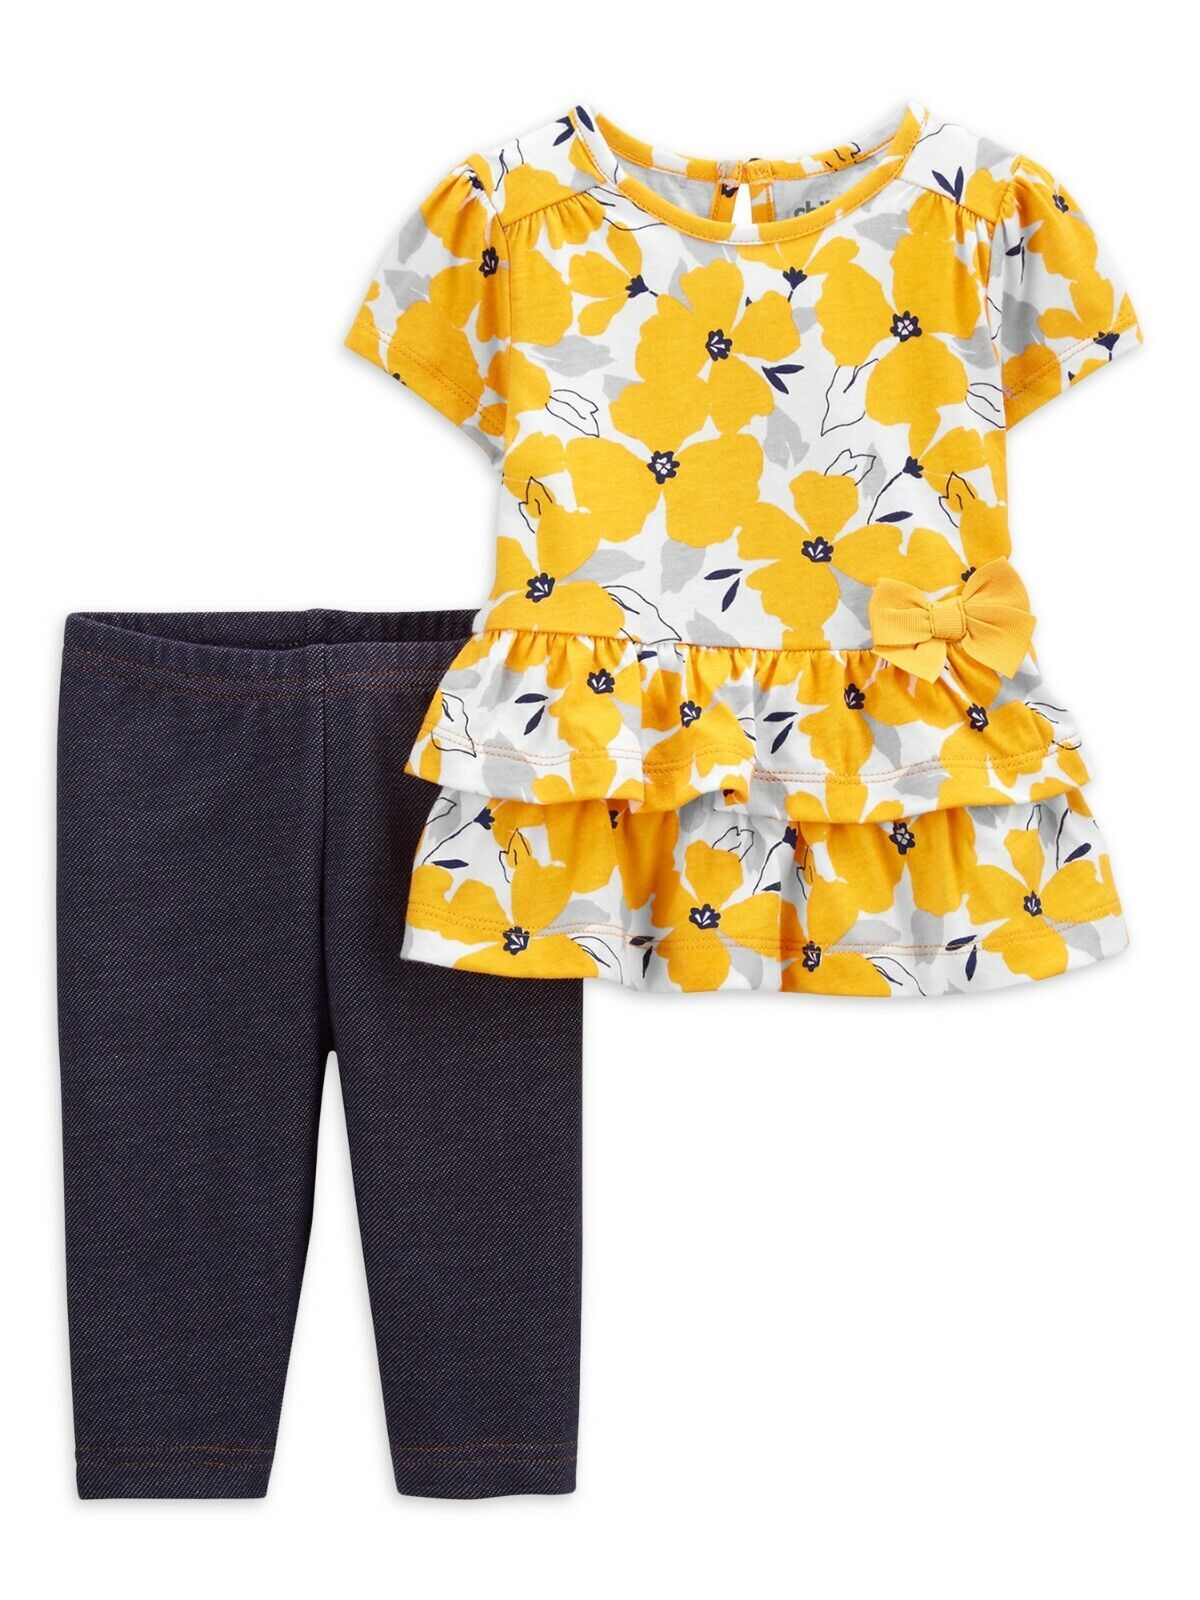 Primary image for Carter's Baby Girls Keyhole Ruffle Peplum Top & Legging Set 12M Yellow Floral